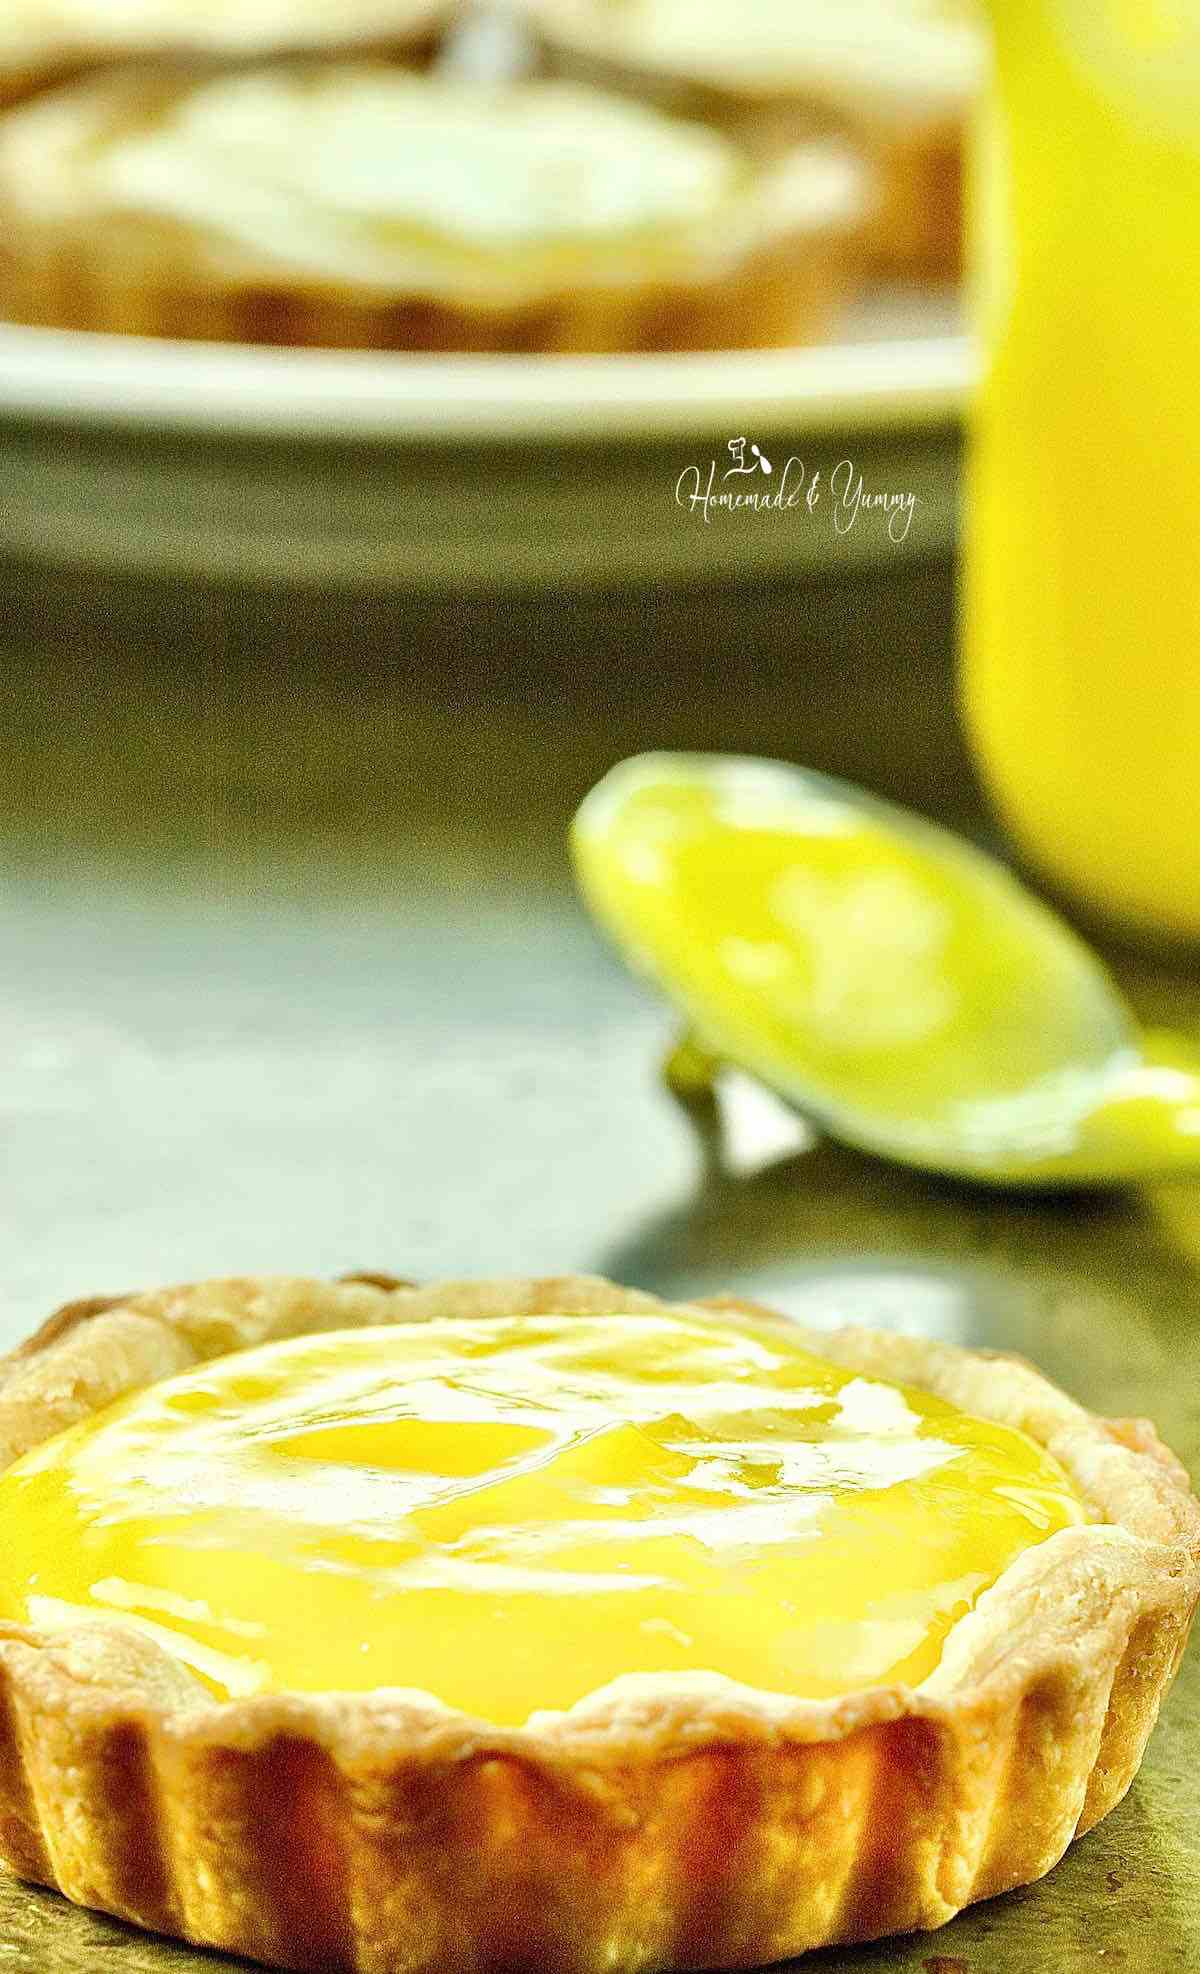 A lemon filled tart with curd.